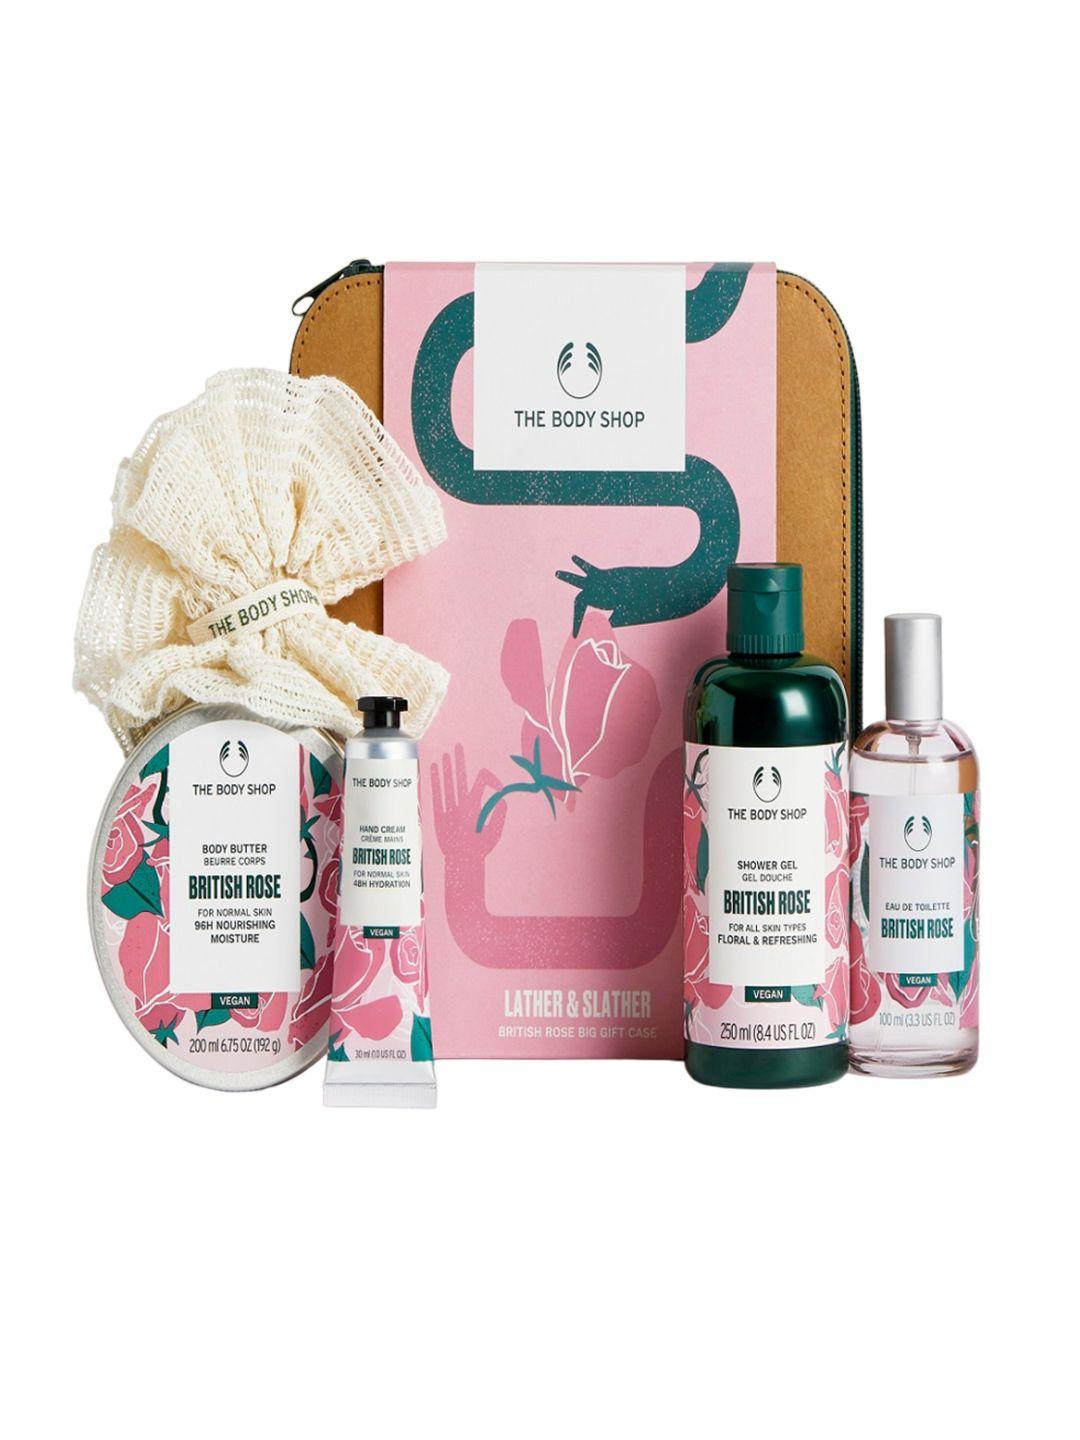 the body shop british rose set of 5 shower gel-body butter-hand cream-edt-small remielily